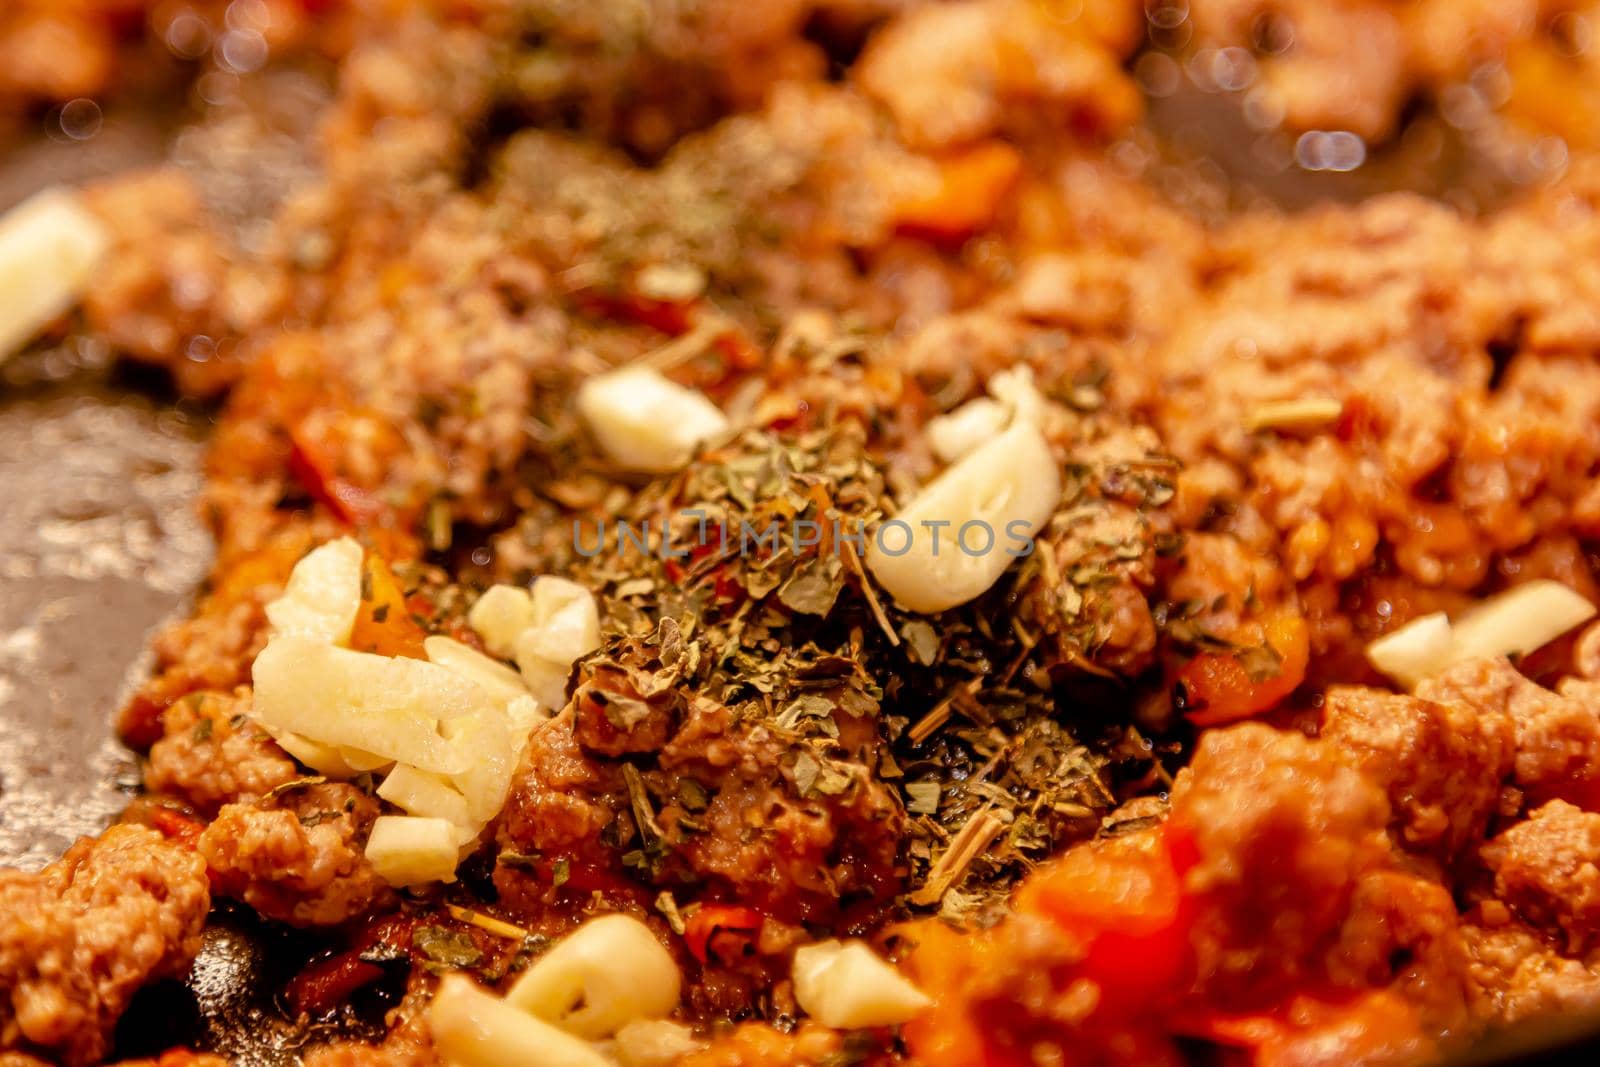 Bolognese ragout in a frying pan with wooden spoon, authentic recipe, close-up by Milanchikov